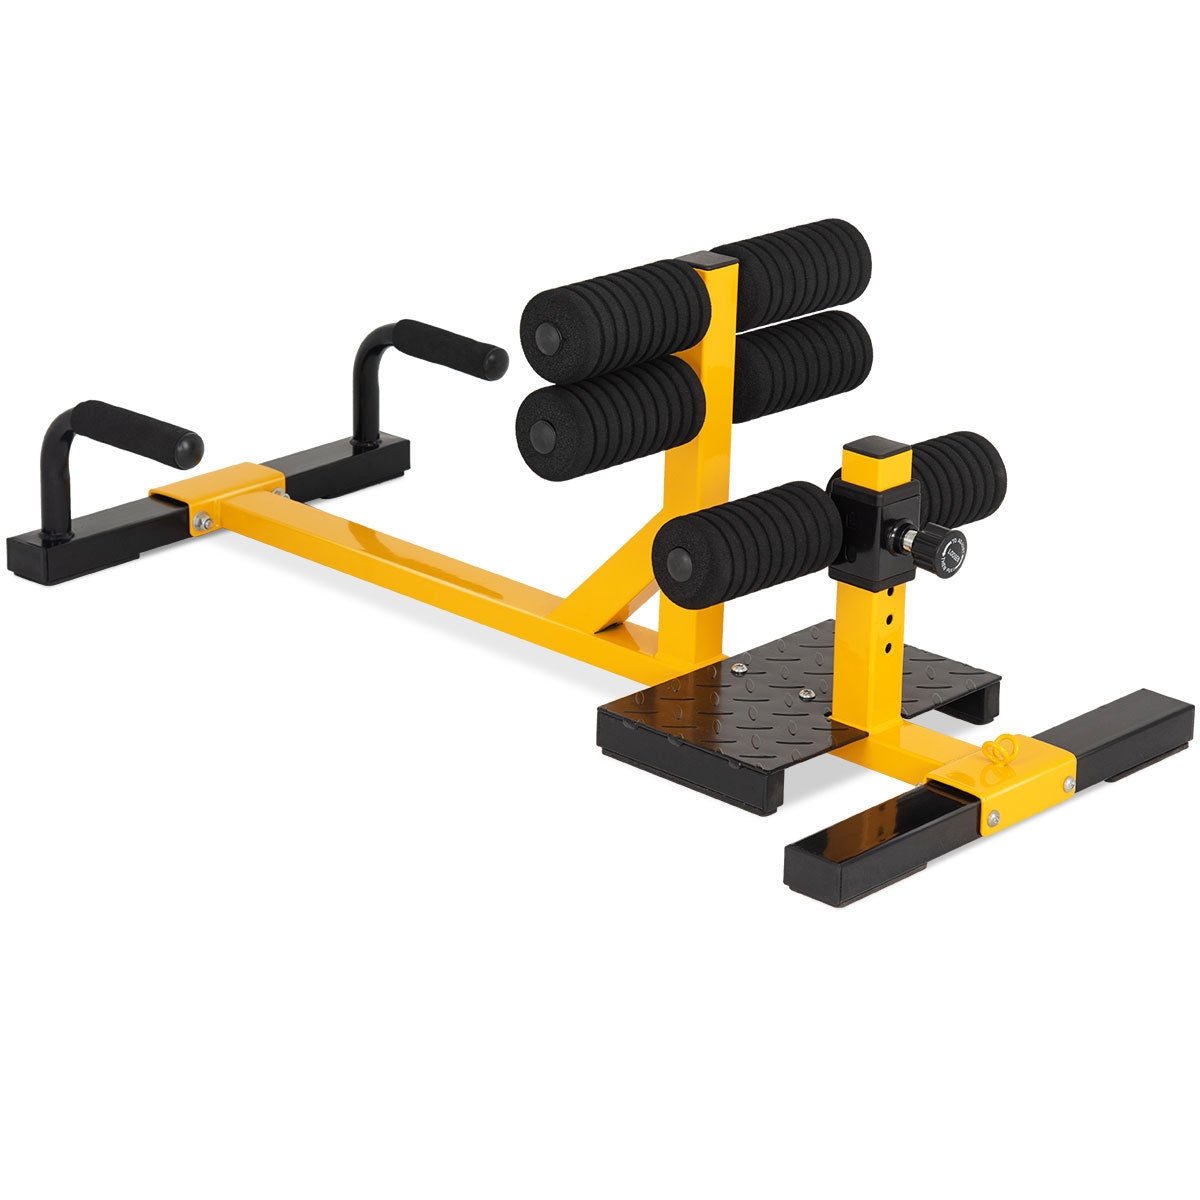 3-in-1 Sissy Squat Ab Workout Home Gym Sit Up Machine at Gallery Canada